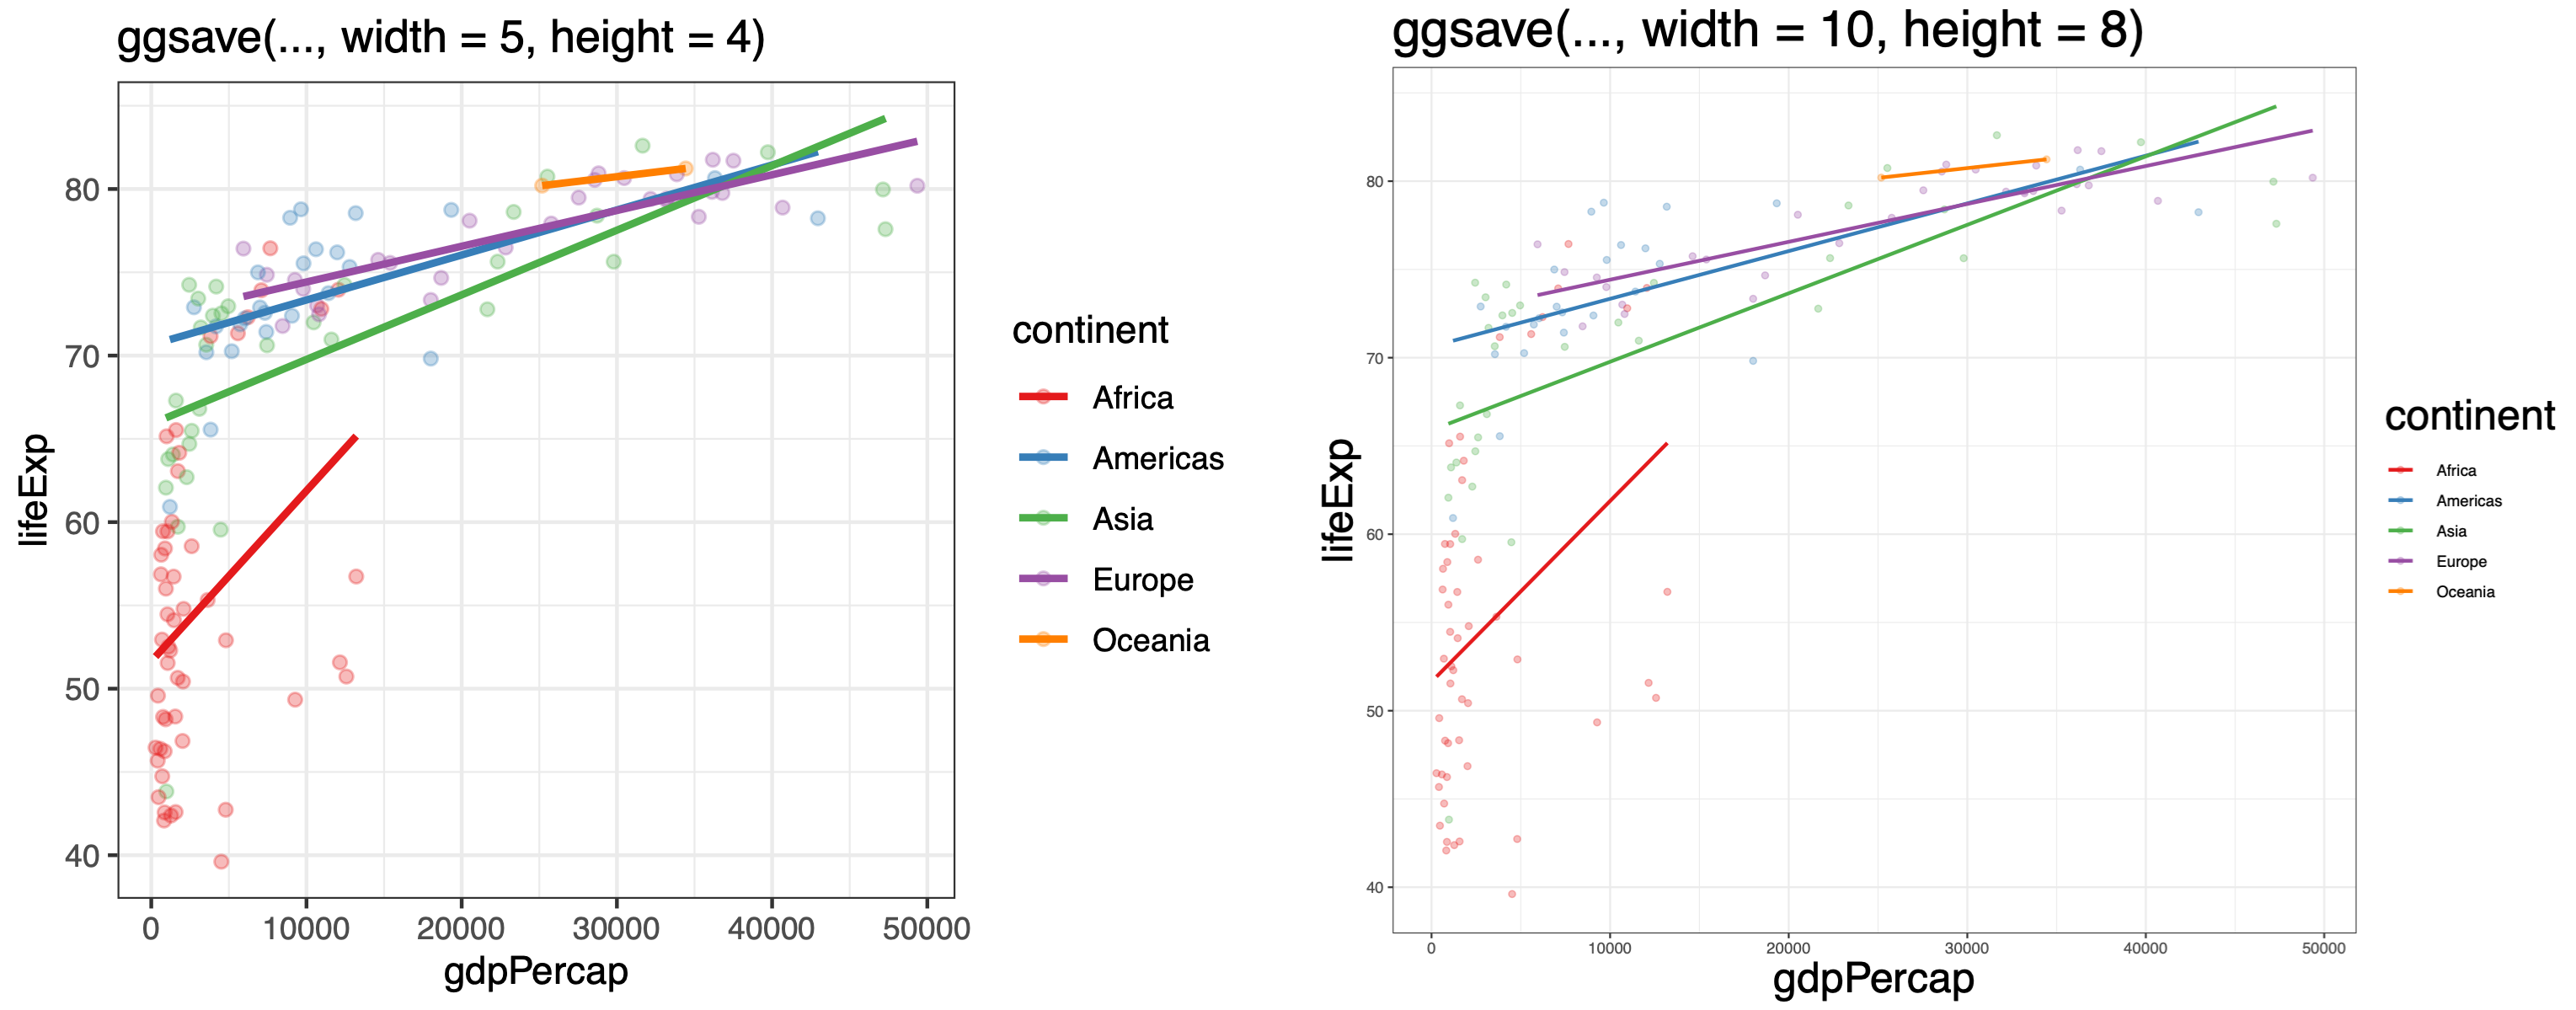 Experimenting with the width and height options within ggsave() can be used to quickly change how big or small some of the text on your plot looks.